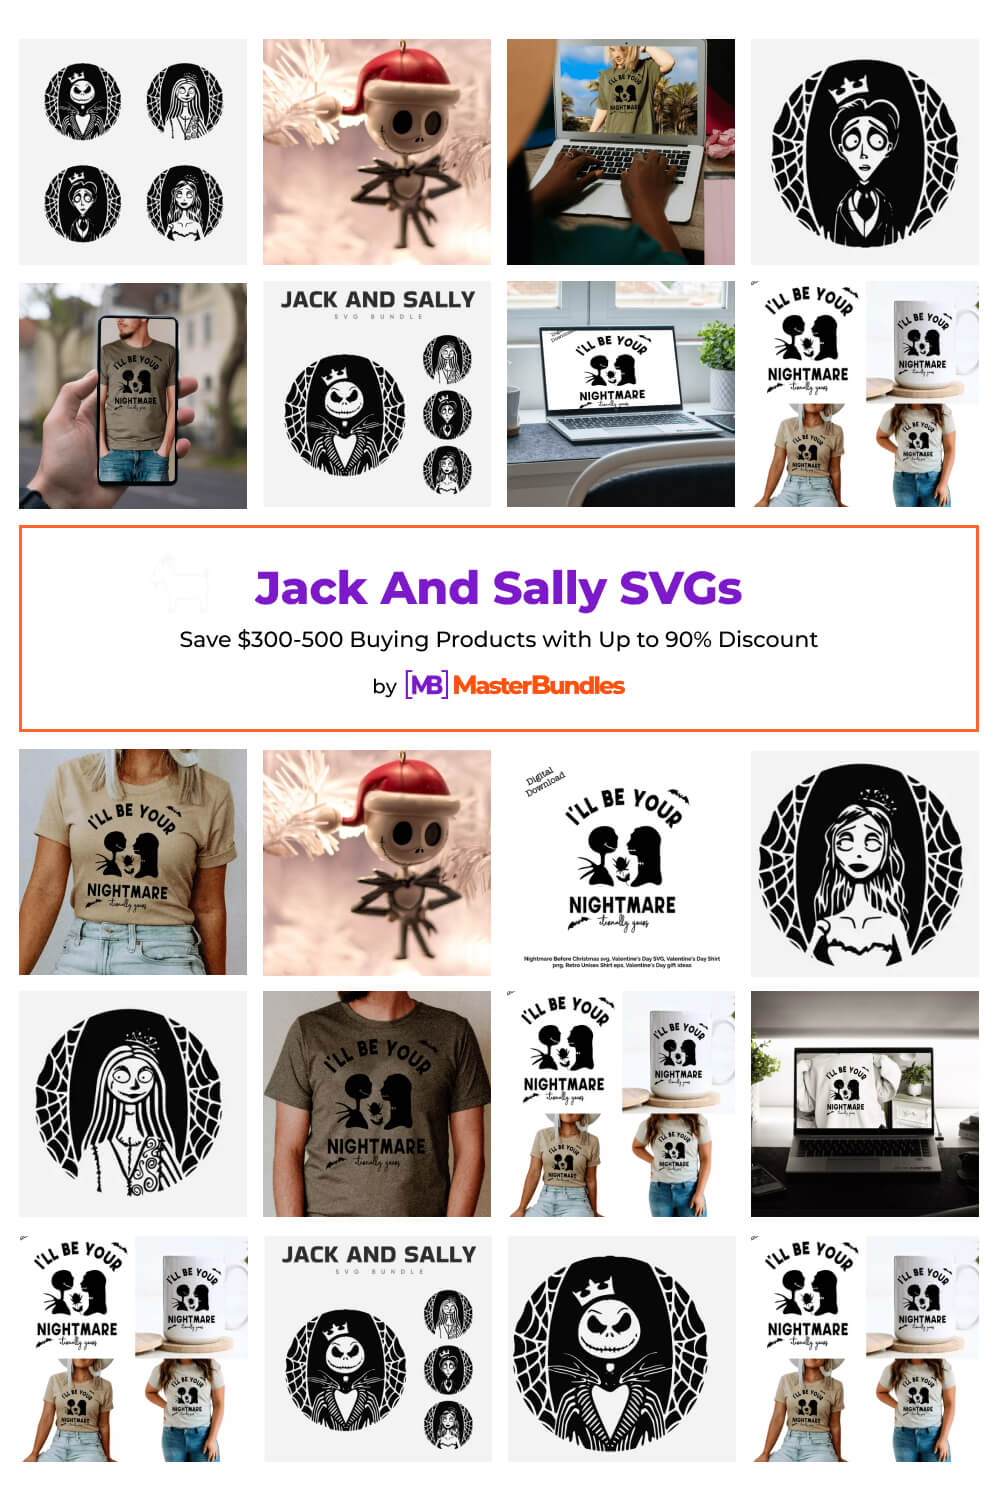 jack and sally svgs pinterest image.